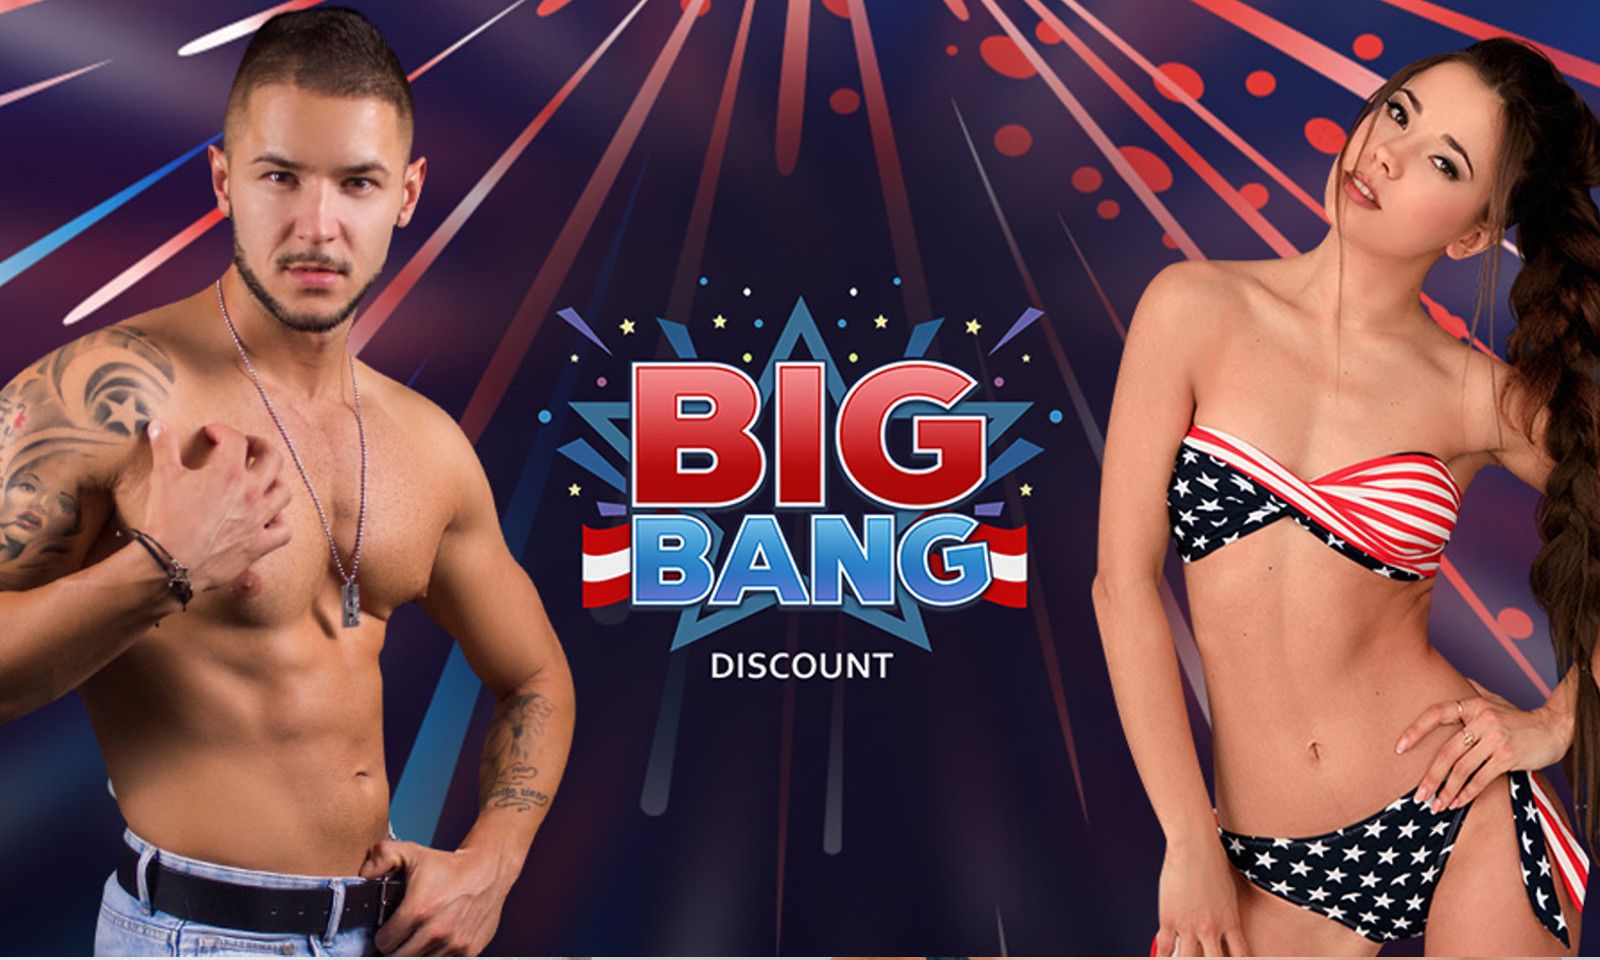 Flirt4Free to Mark Independence Day With Expanded Big Bang Promo